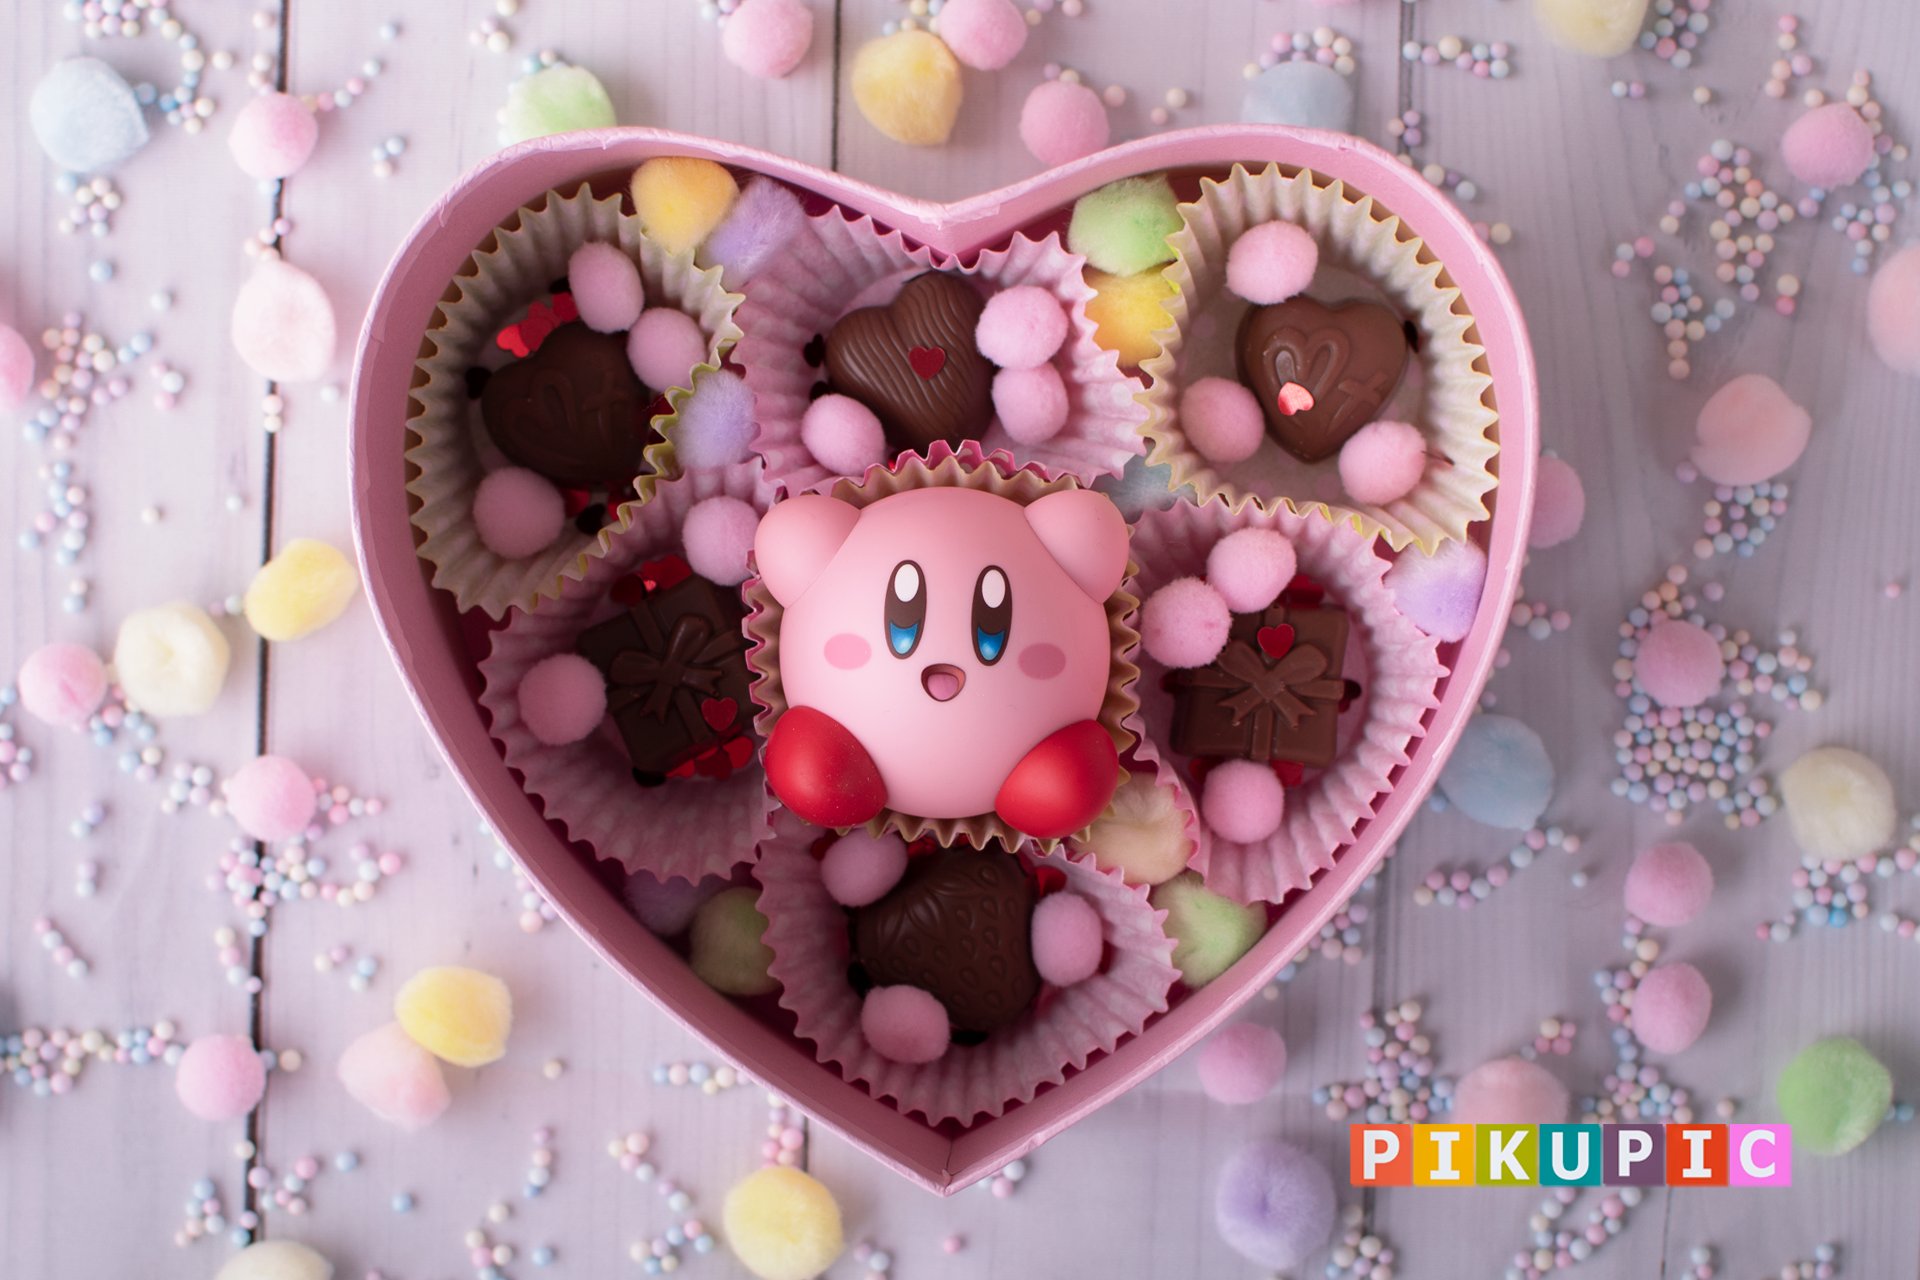 Pikupic don't need someone to complete you. You only need someone to accept you completely ♥ Happy valentines day ♥♥ #kirby #nendography #valentines #sanvelentin #nintendo